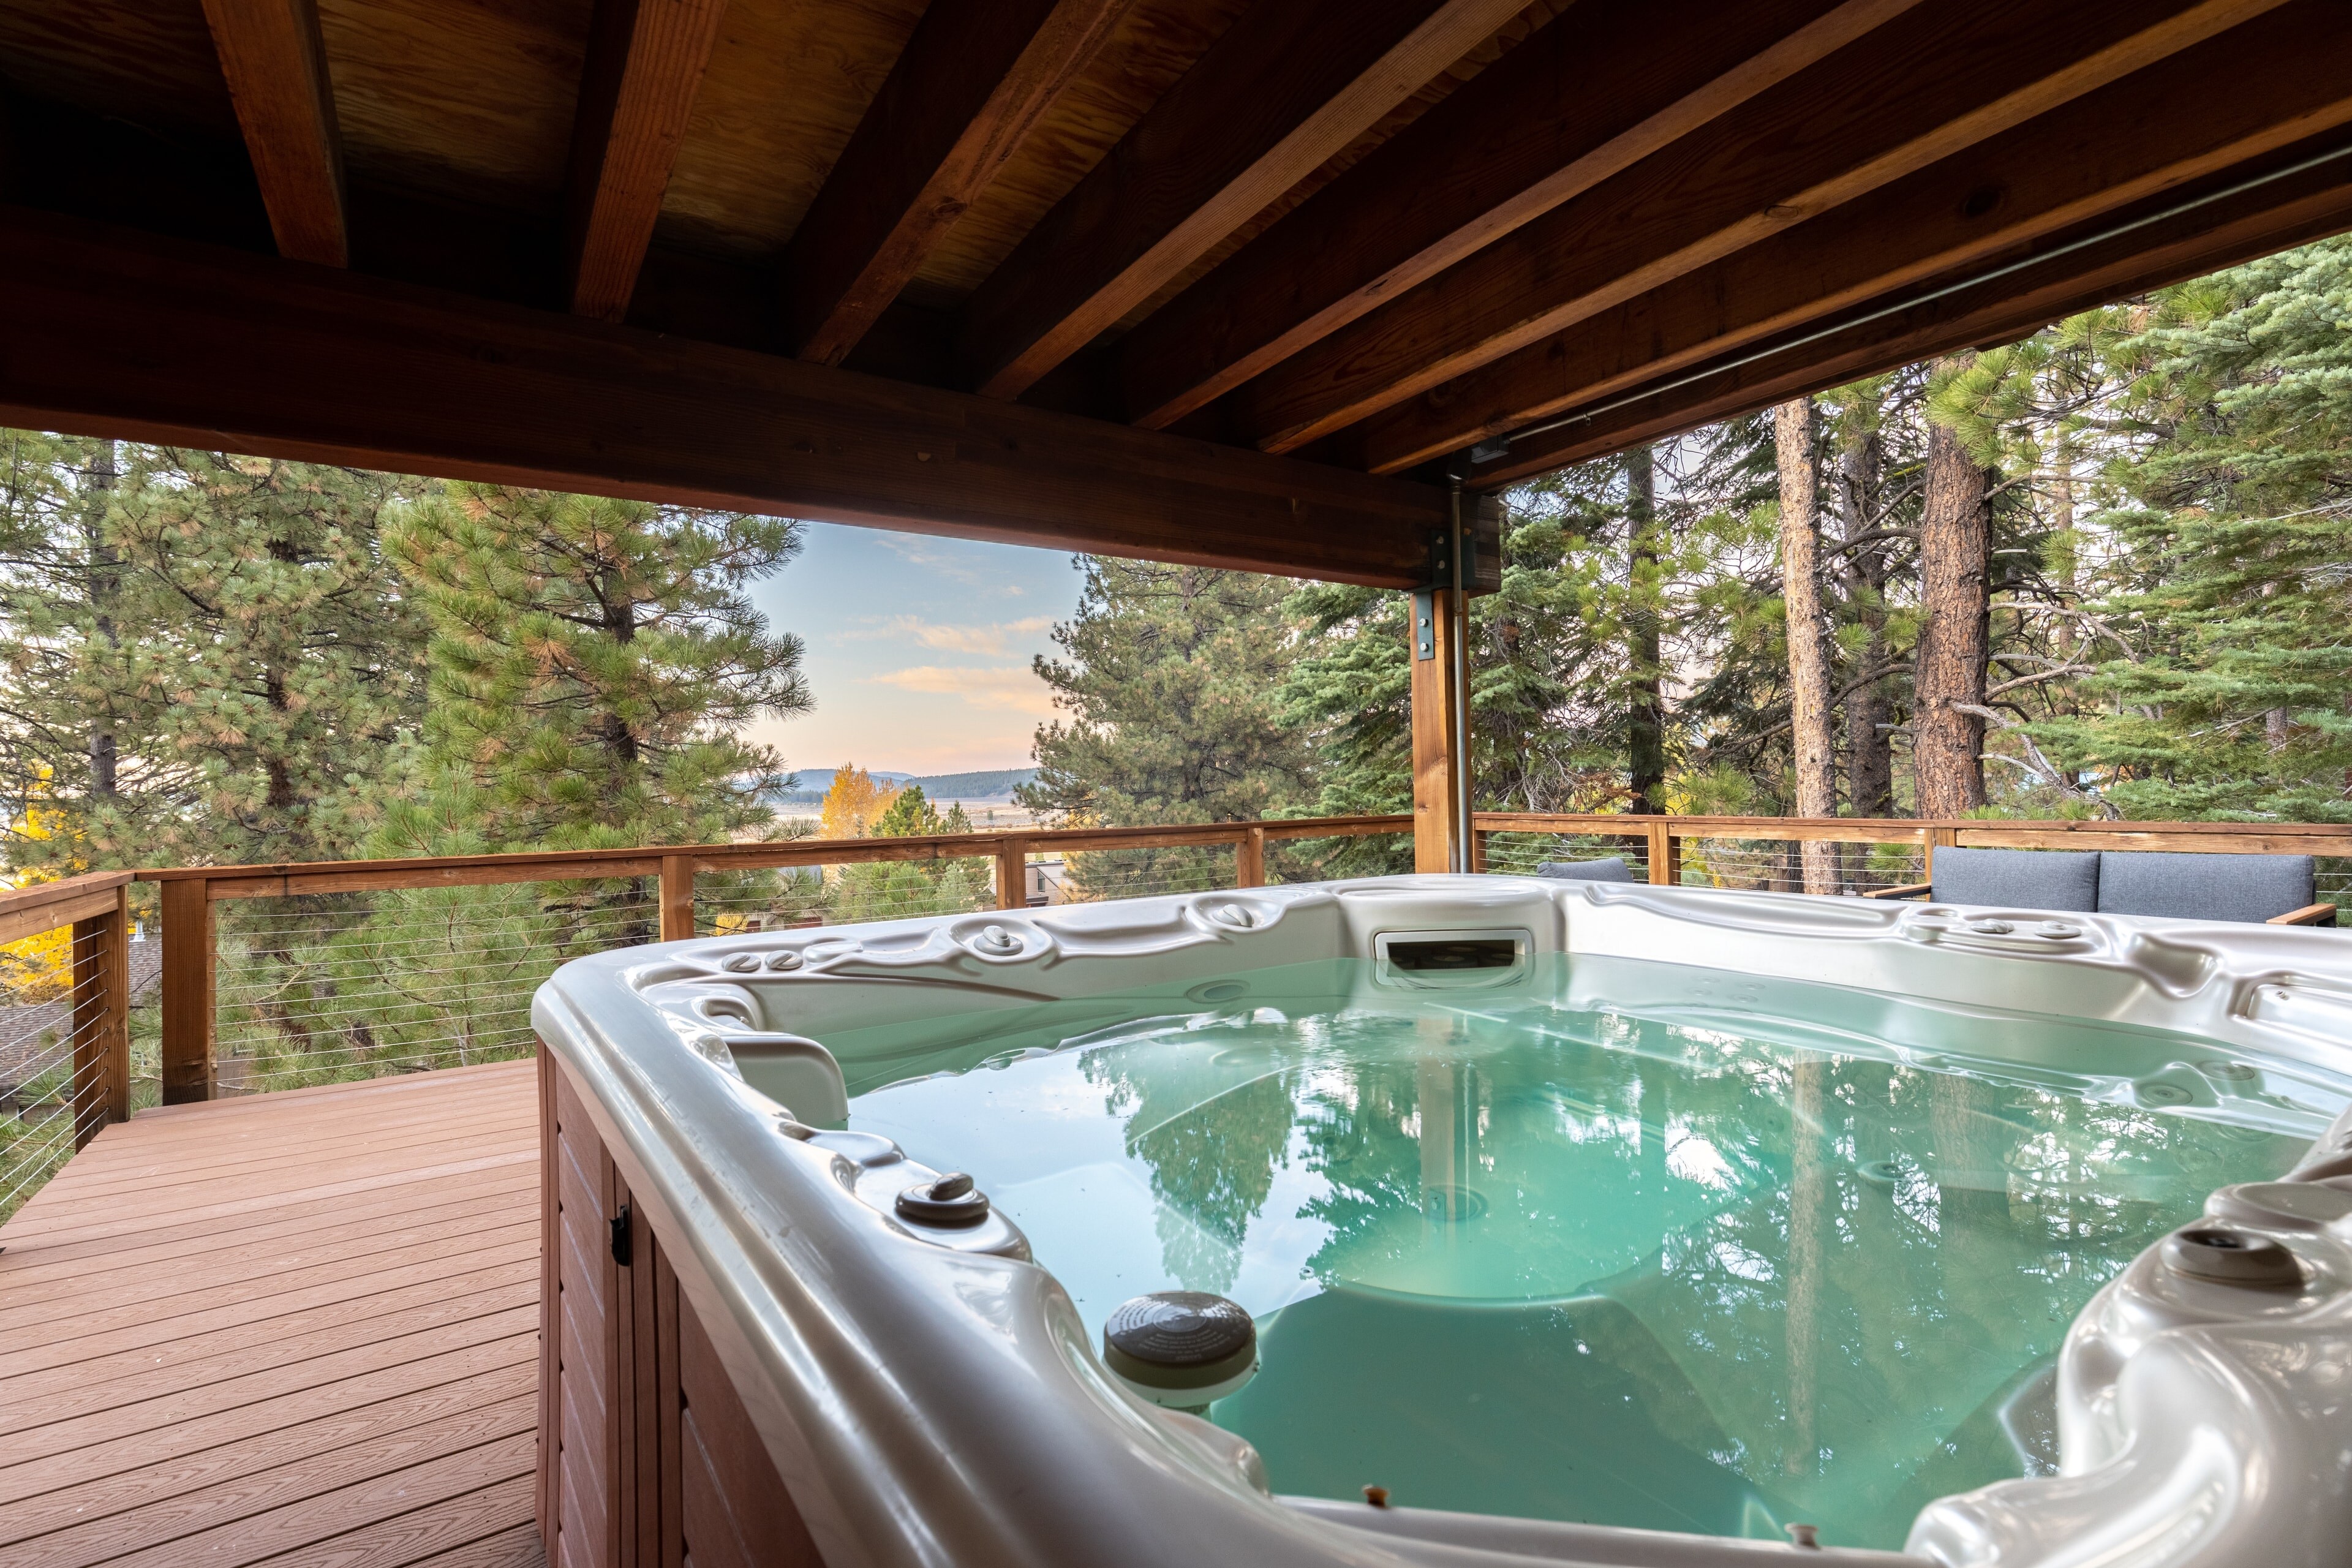 Enjoy the view from the hot tub.